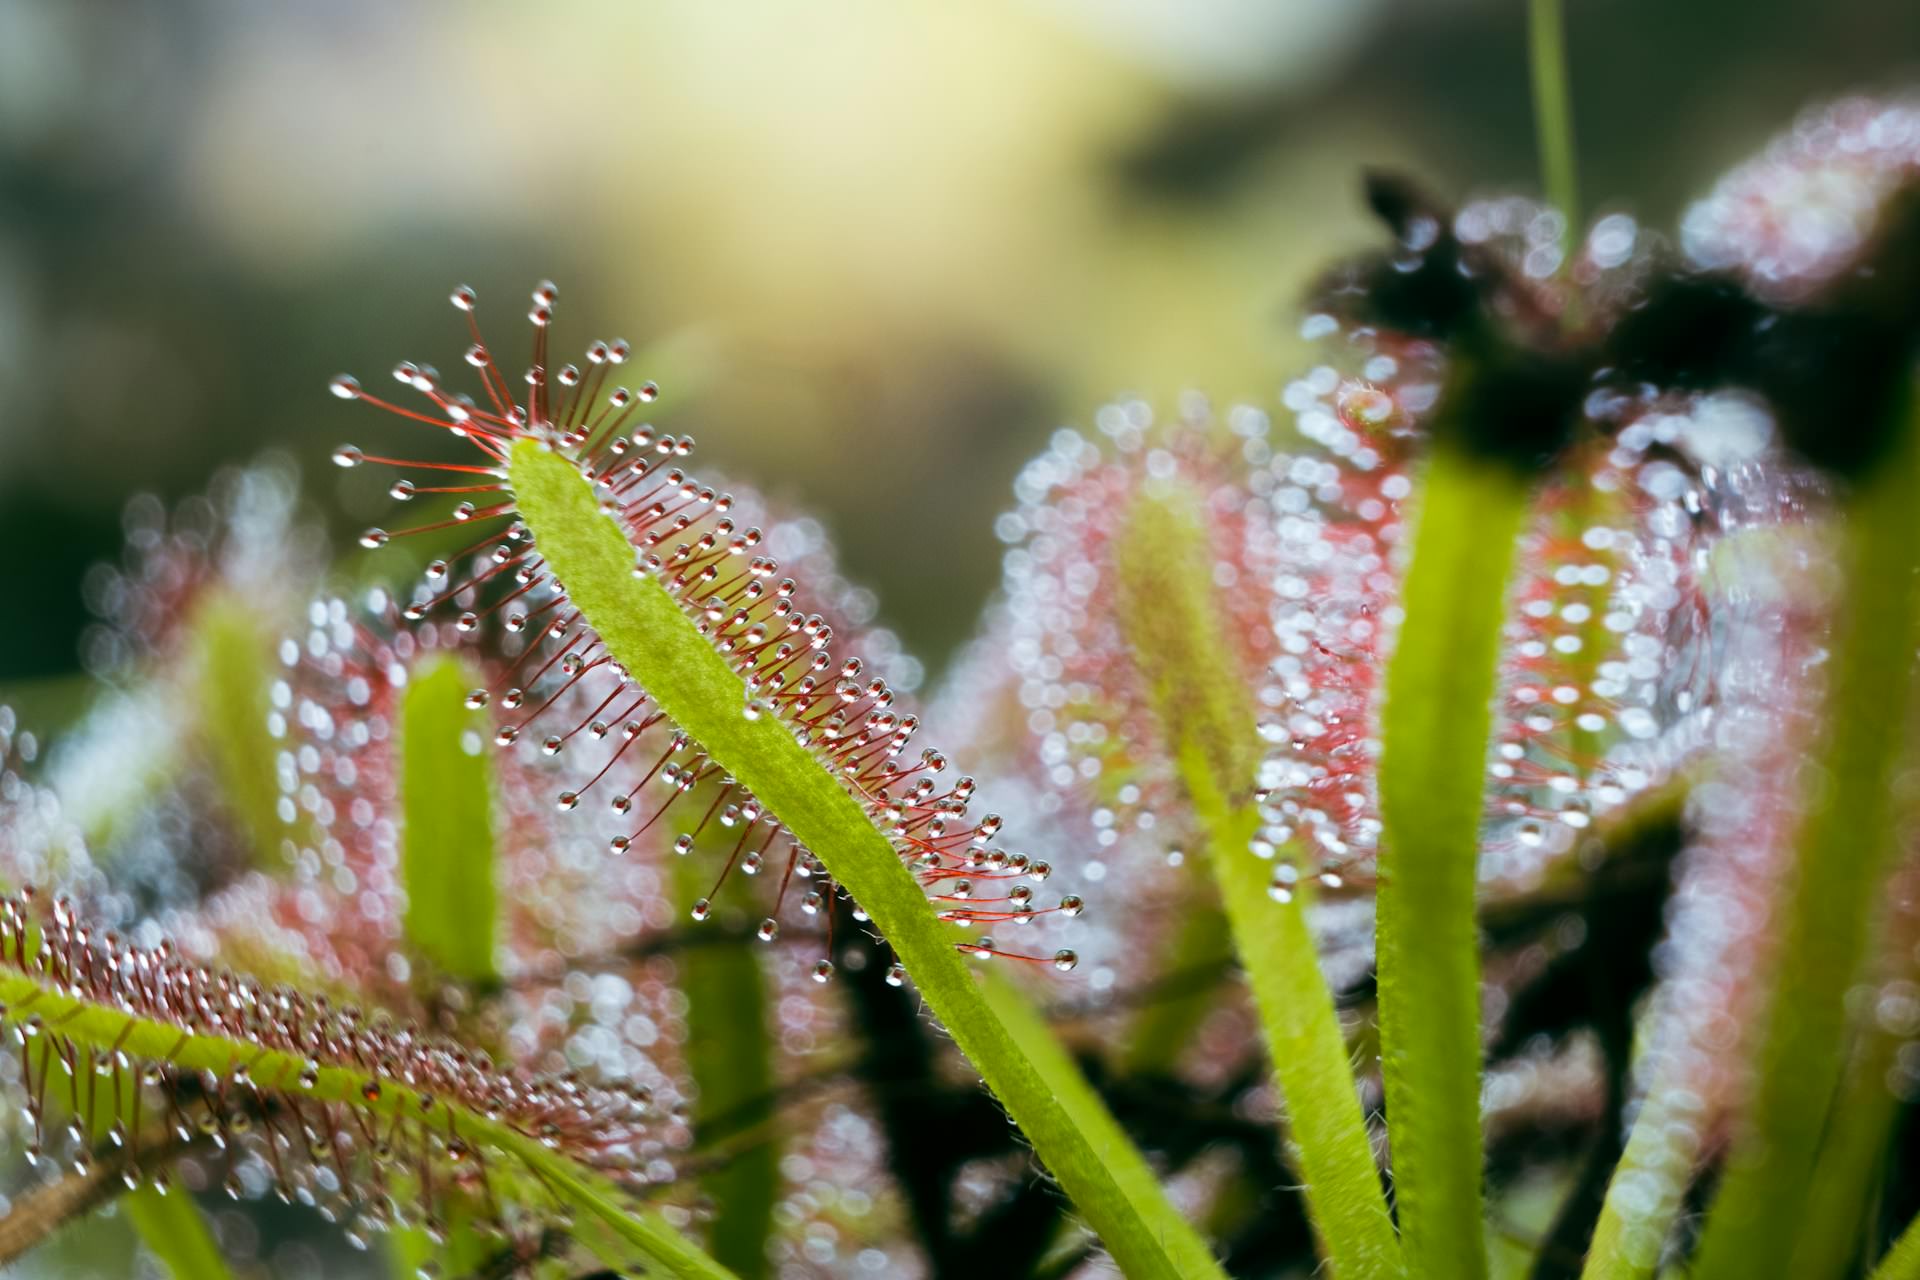 The sundew plant has evolved a unique method of capturing prey. Its long, sticky tentacles are adorned with sweet secretions that lure and trap insects, which are then slowly digested by the plant.